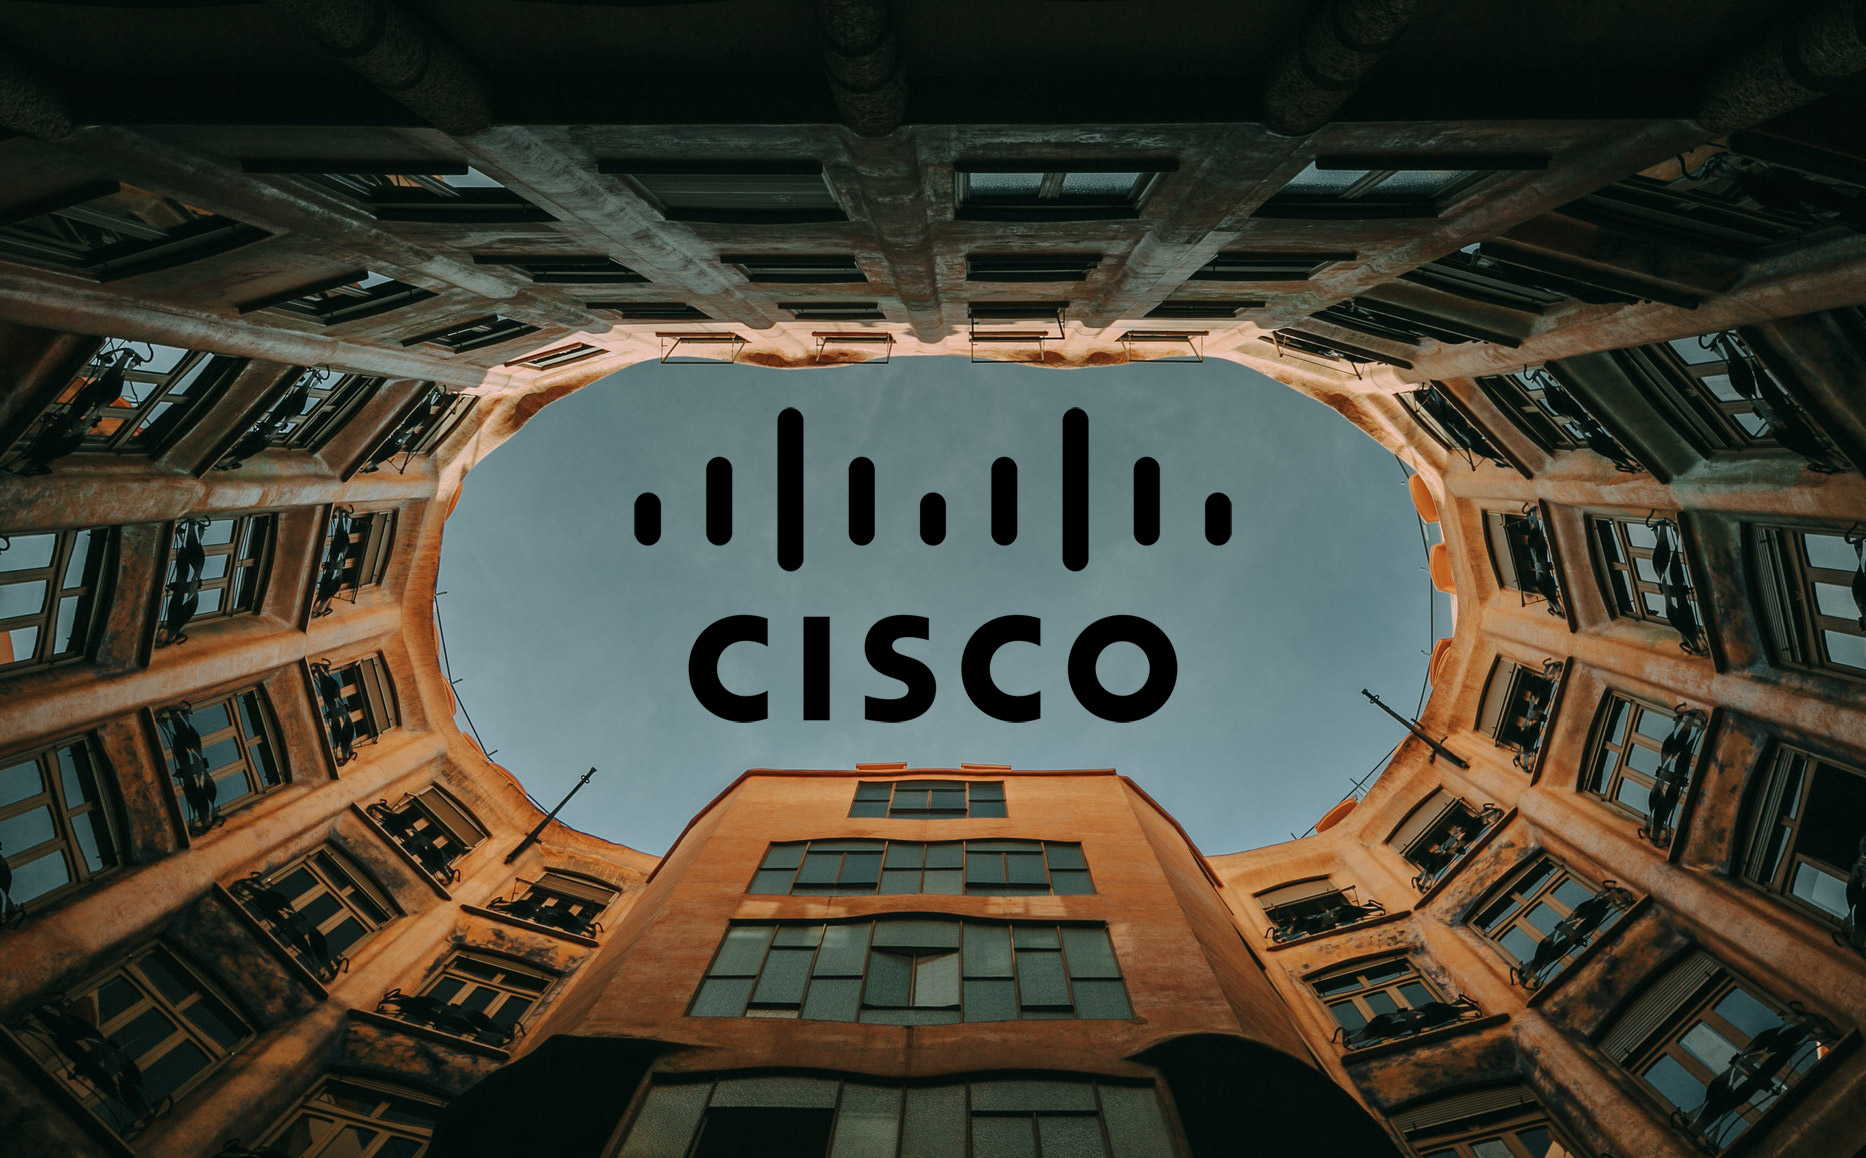 Cisco warned about 0-day vulnerabilities